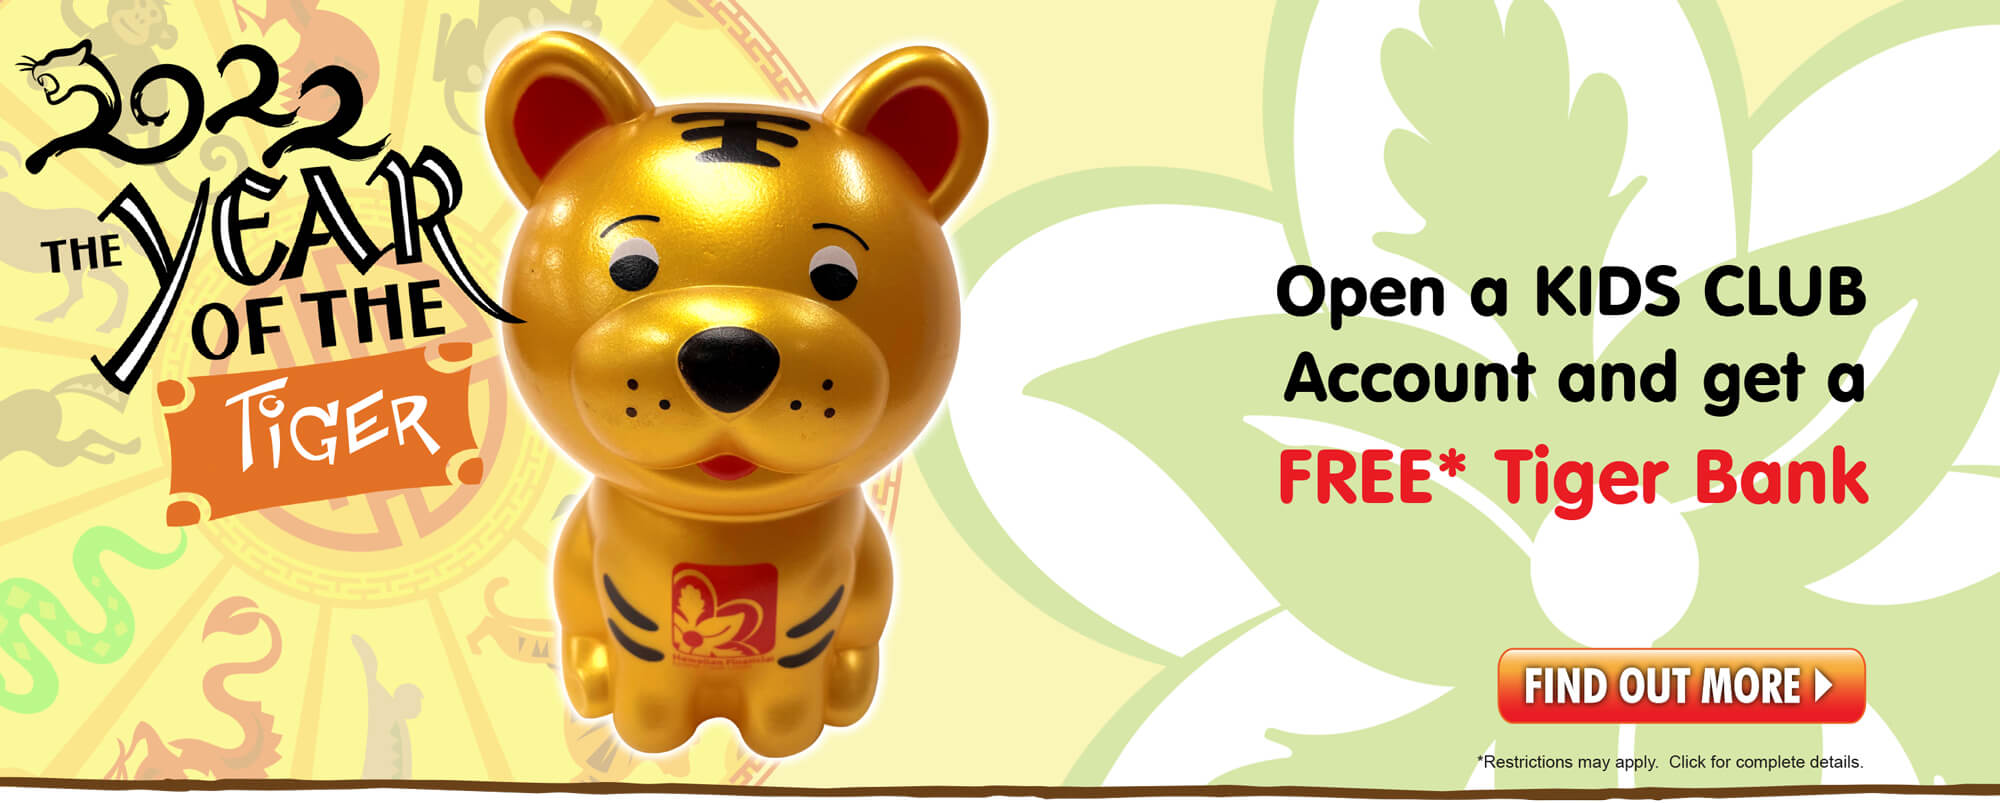 Open a Kids Club account with at least $100 and get a FREE Year of the Tiger Bank!